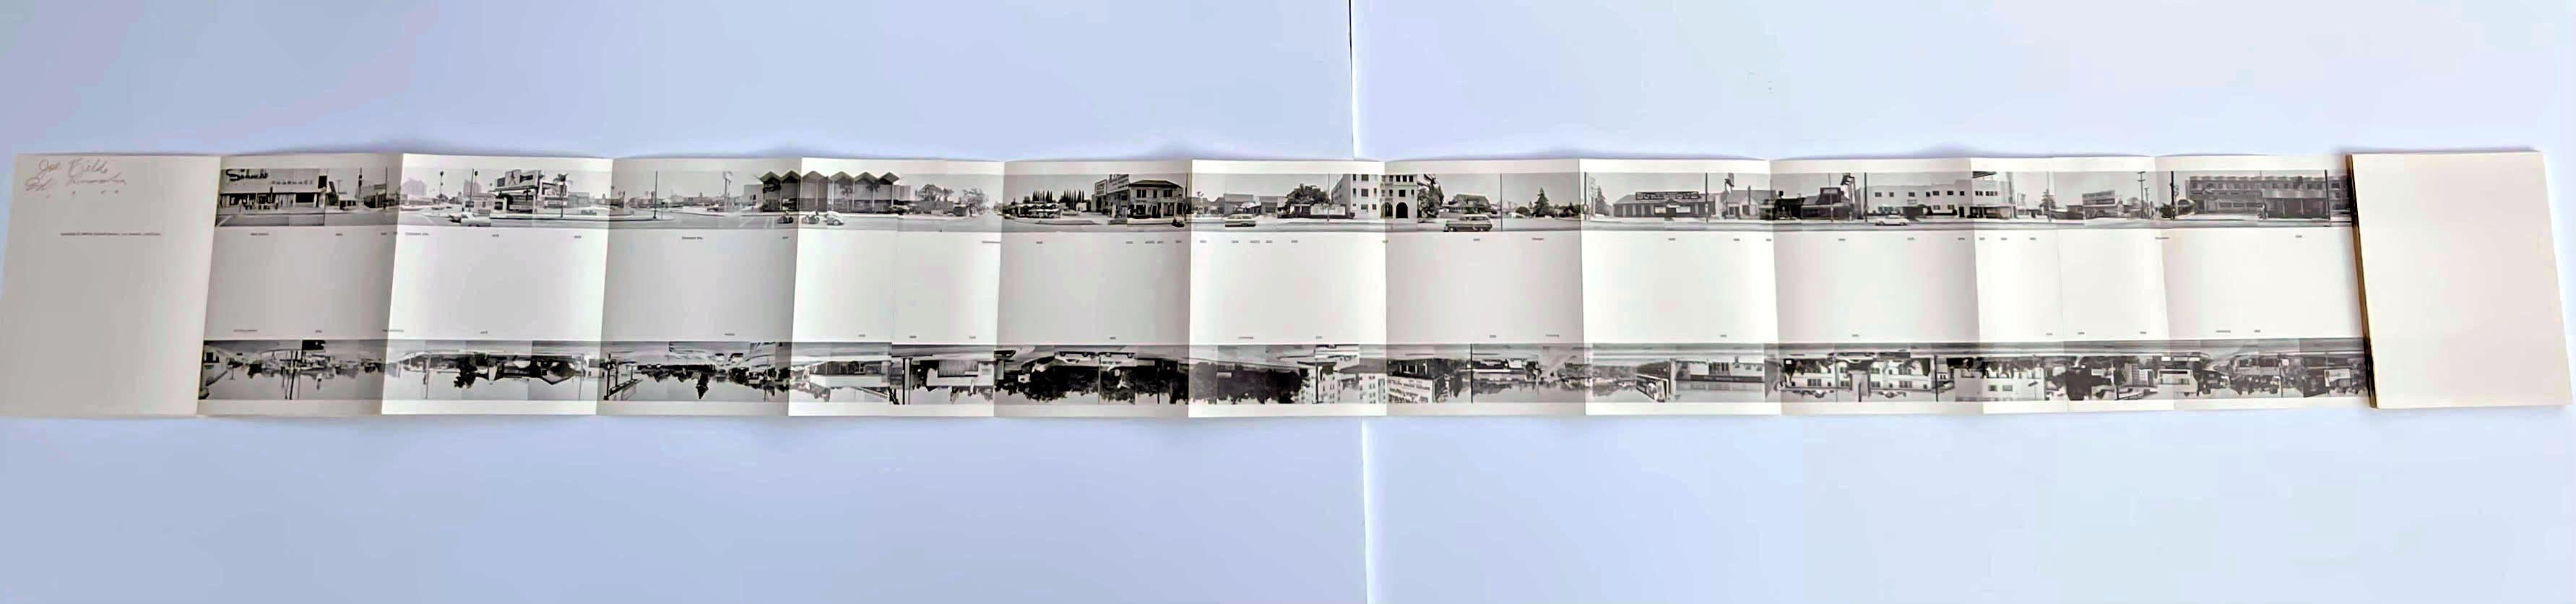 Every Building on the Sunset Strip, 1st Edition, Signed & inscribed w/provenance For Sale 11